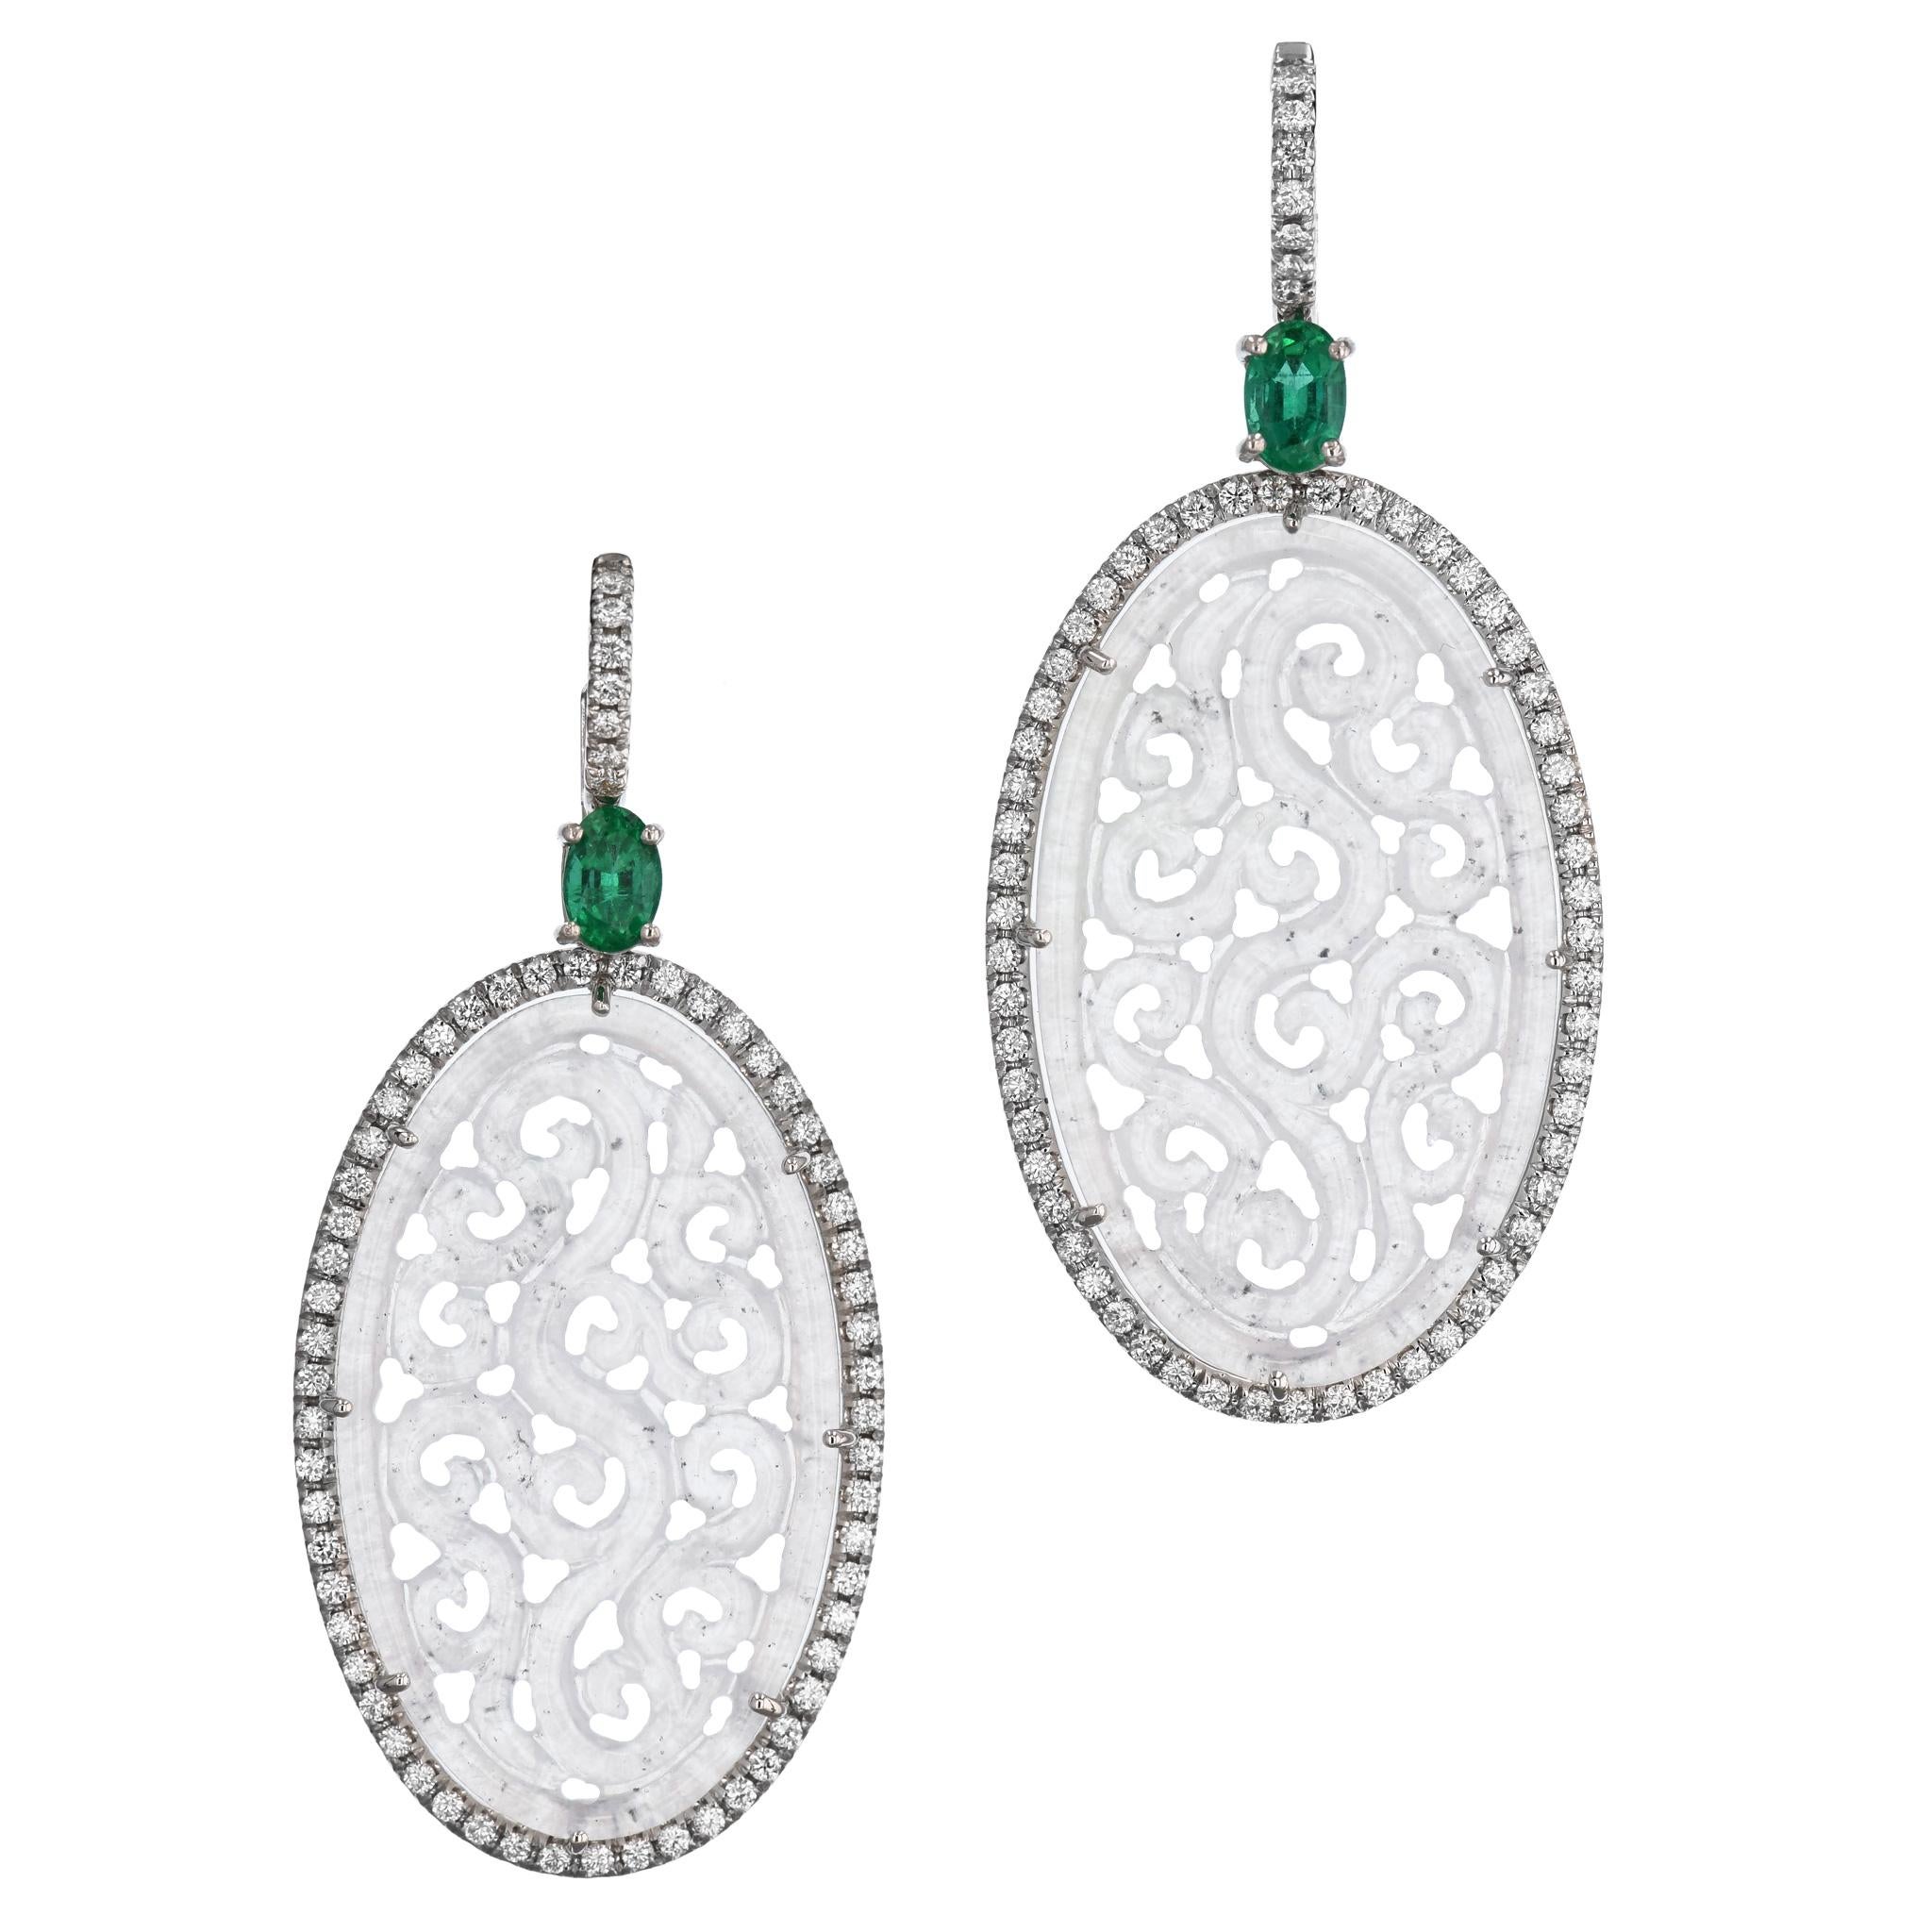 These one of a kind, intricately carved, opulent, and handcrafted Icy Jadeite and Zambian Emerald White Gold Drop Earrings will take your breath away. 
Featuring Burma Icy Jadeite oval stones and radiant Zambian Emeralds prong-set at the top, each